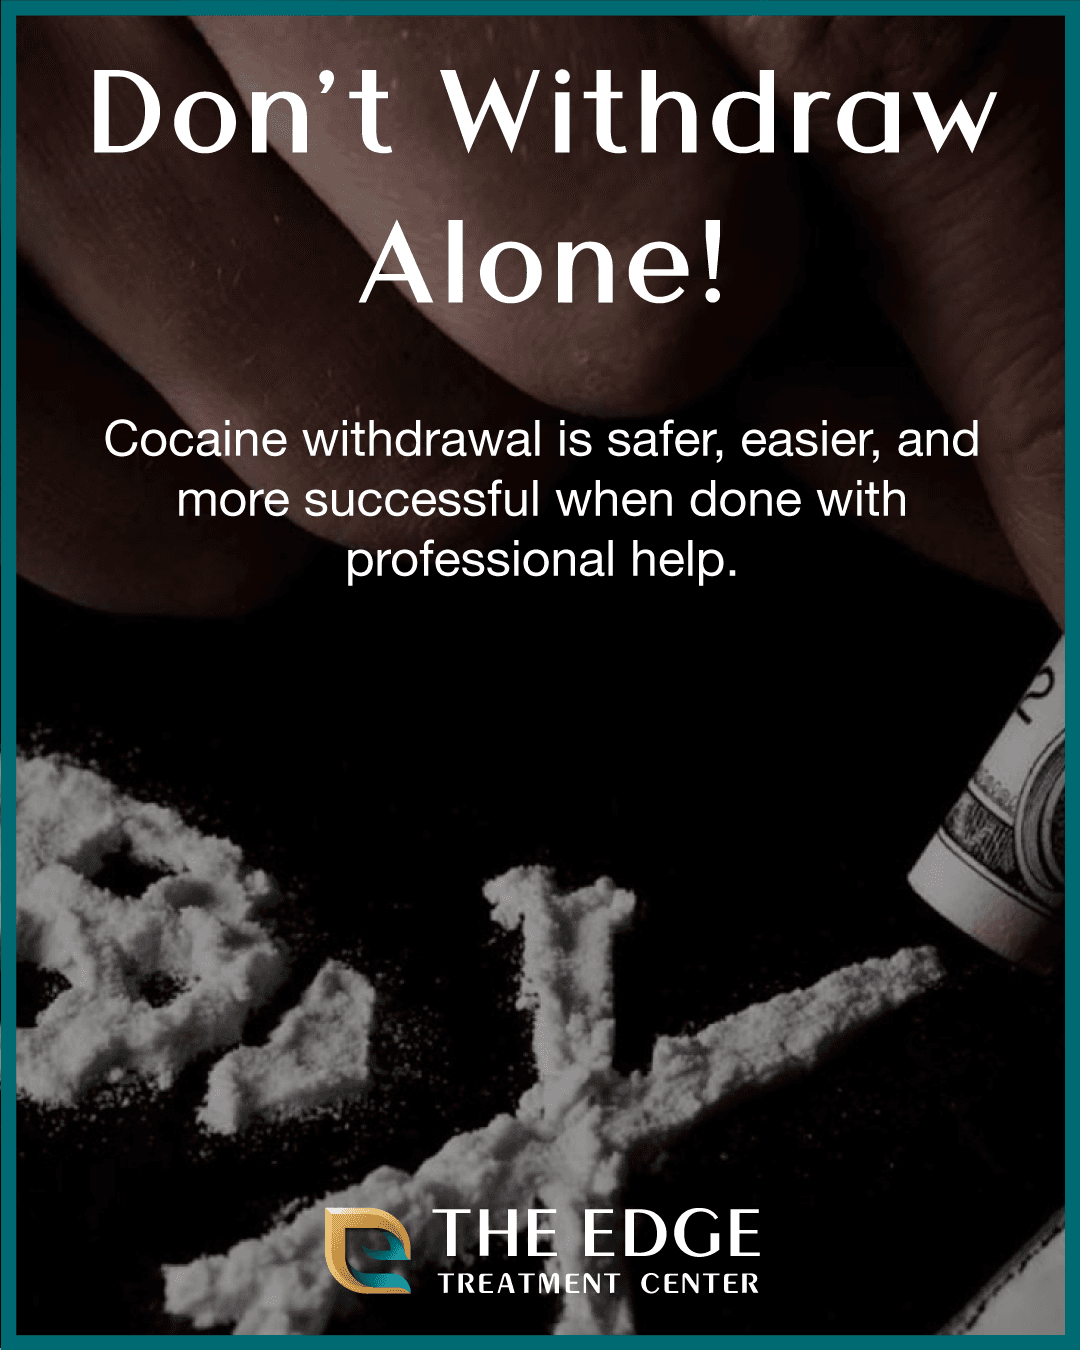 Dangers of Cocaine Withdrawal